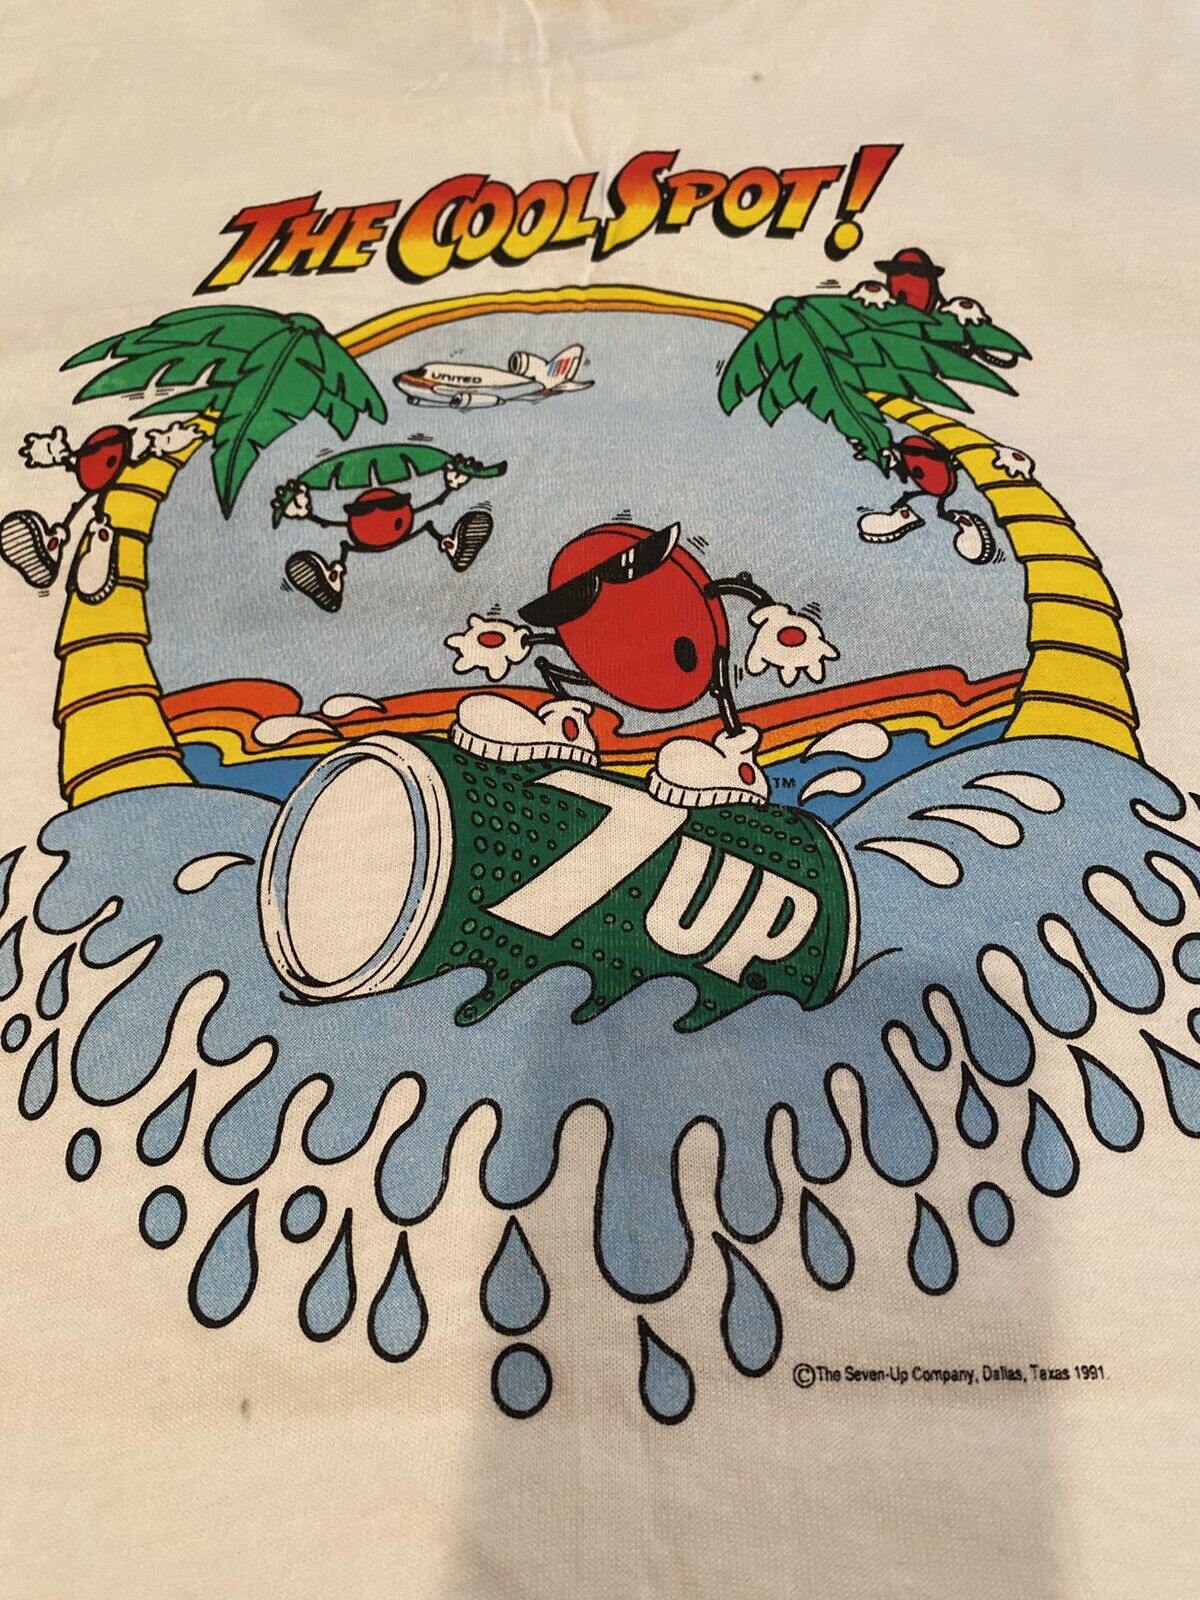 VINTAGE 7-up T SHIRT, THE COOL SPOT,1991 ANIMATED GRAPHICS,SINGLE STITCH